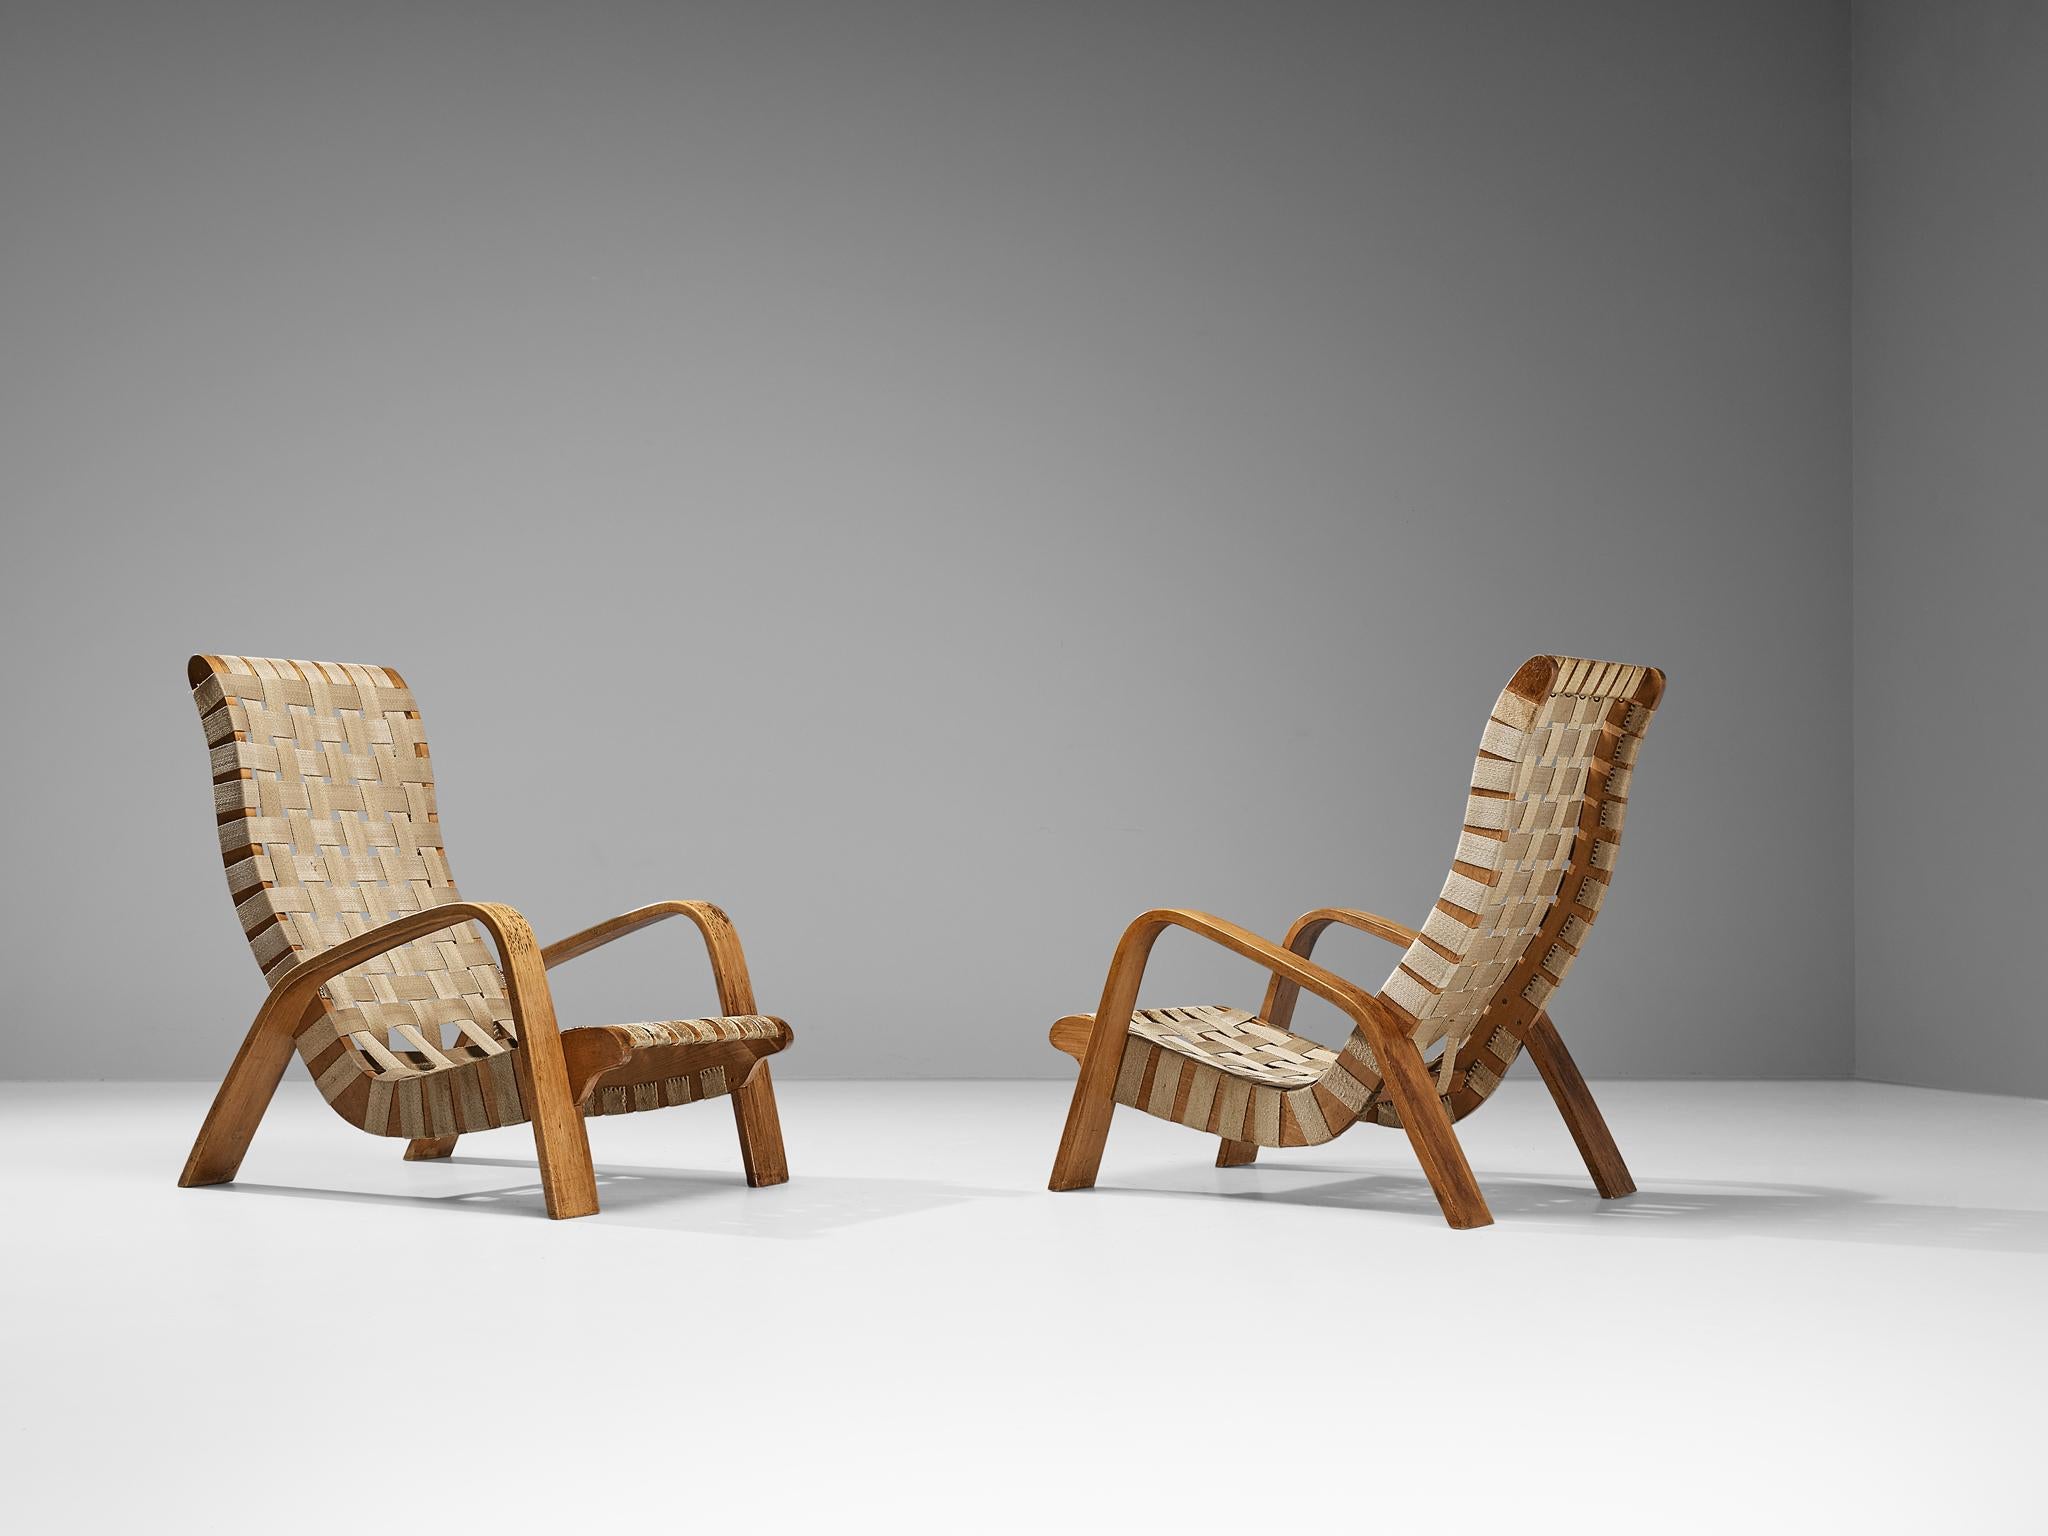 Pair of lounge chairs, beech, canvas, fabric, Czech Republic, 1950s

Sculpted lounge chairs made in the Czech Republic in the 1950s. These chairs are made in a slender beech frame, and are upholstered in canvas webbing. The straps are connected to